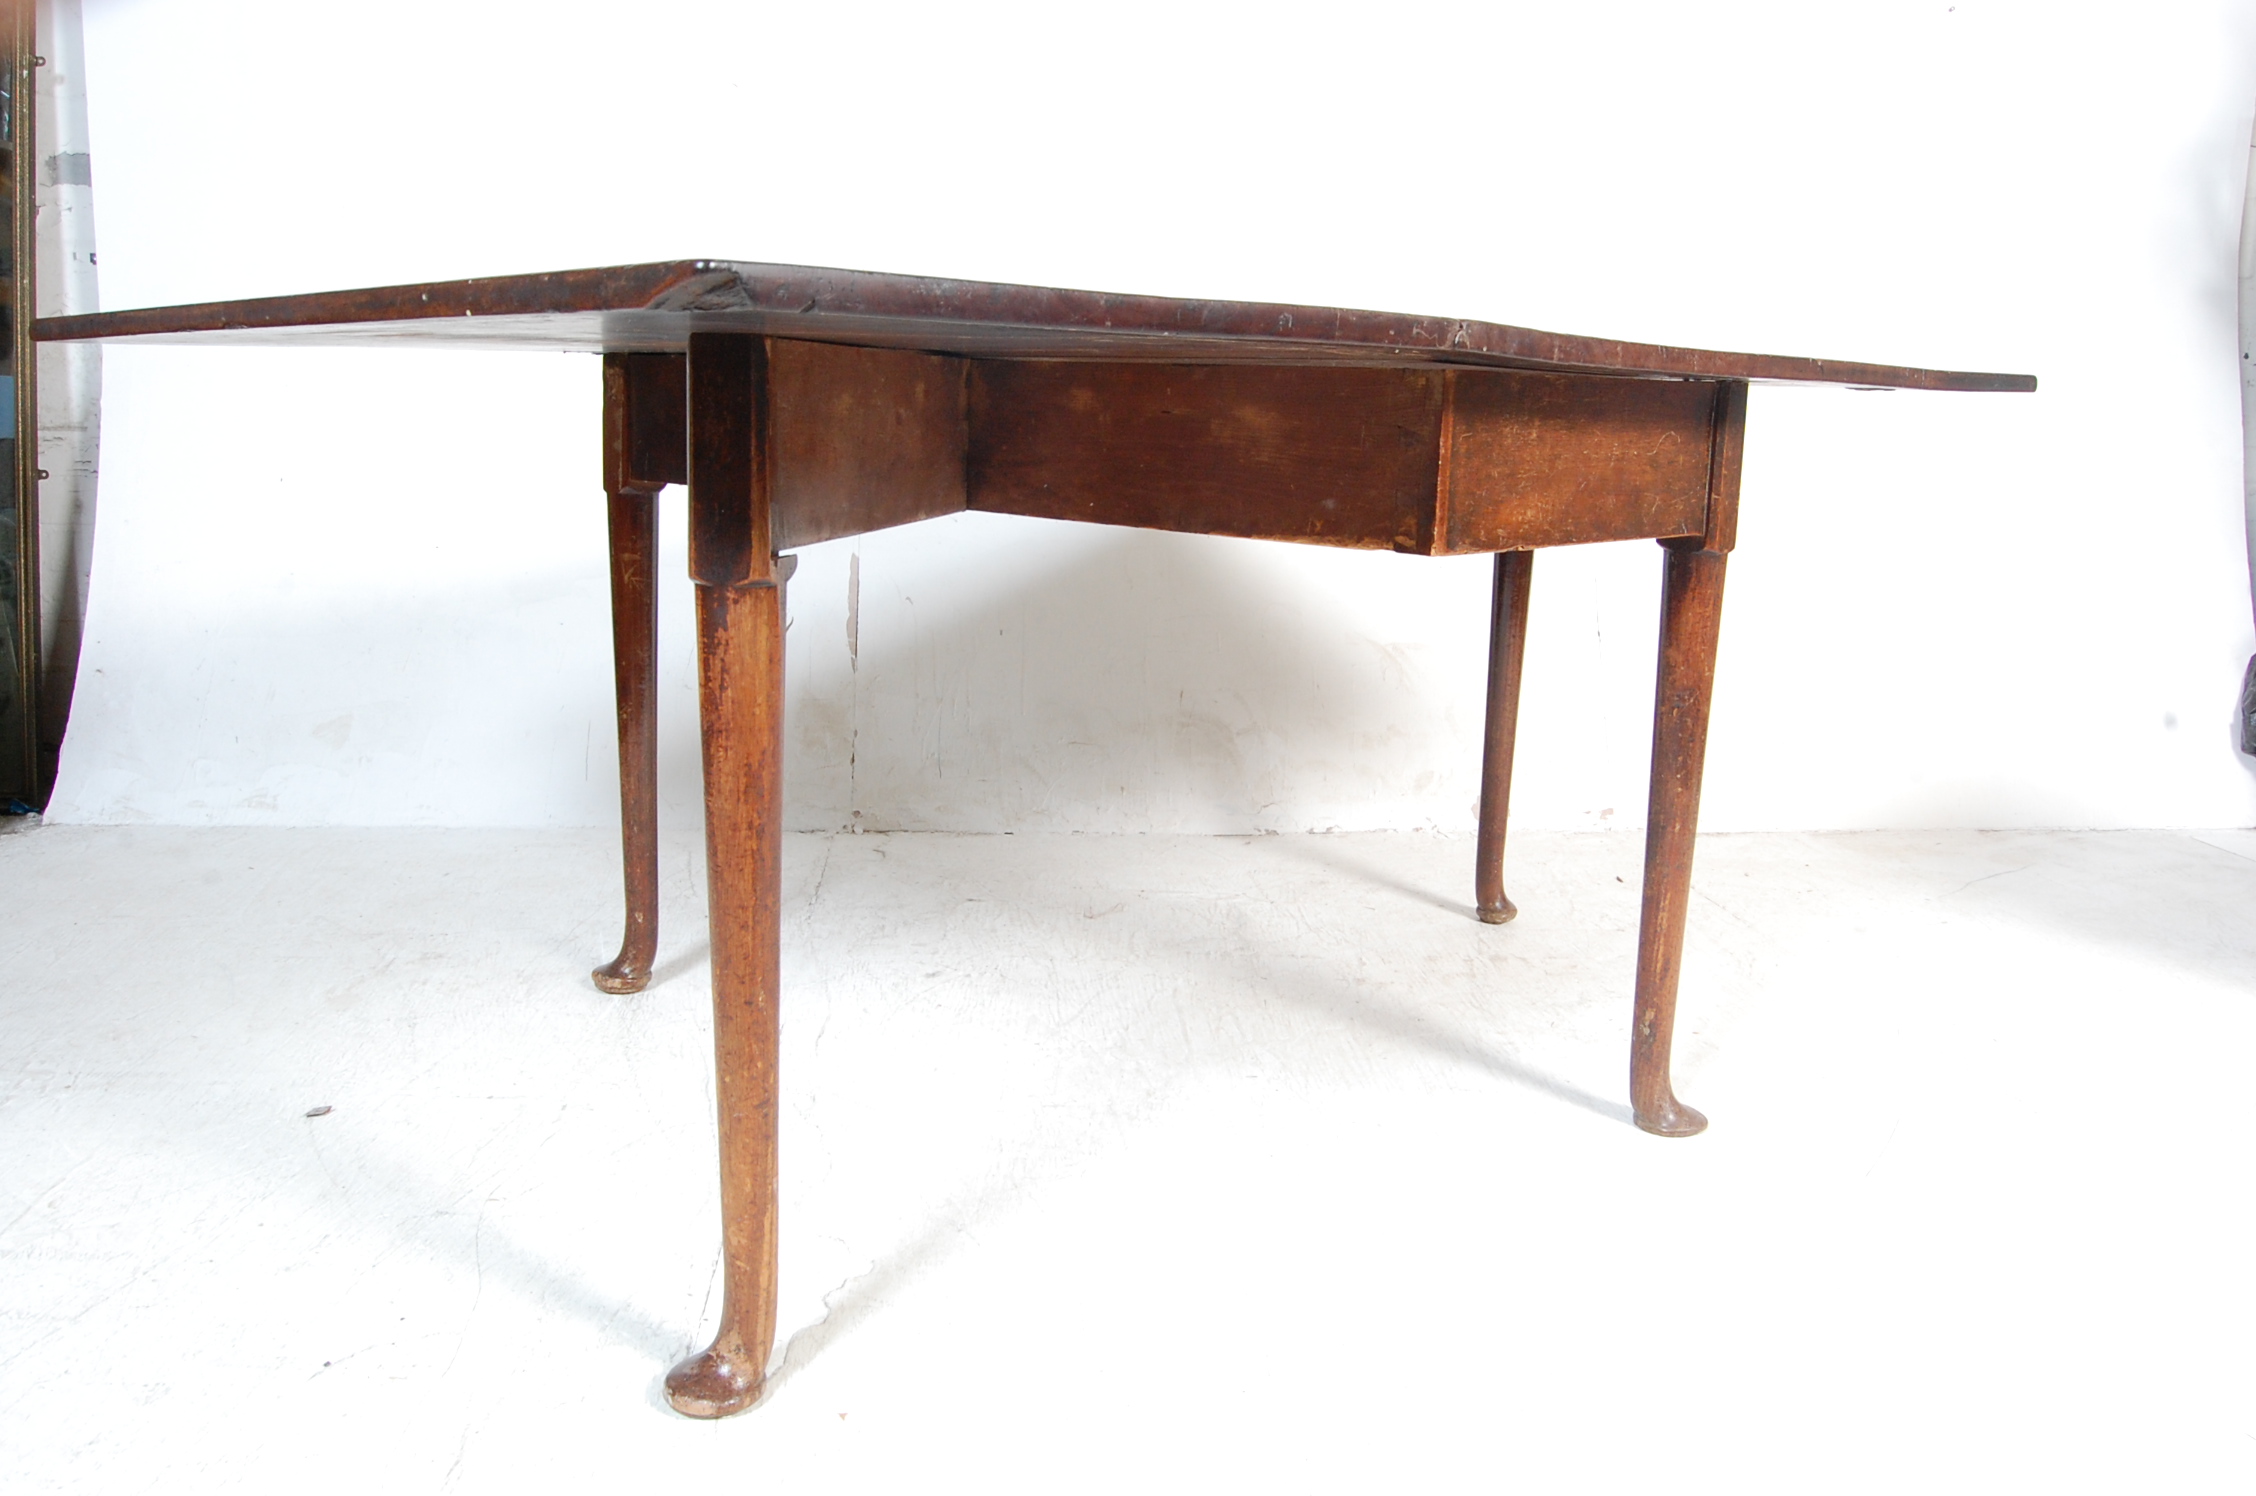 ANTIQUE GEORGE III MAHOGANY DROP LEAF DINING TABLE - Image 5 of 5